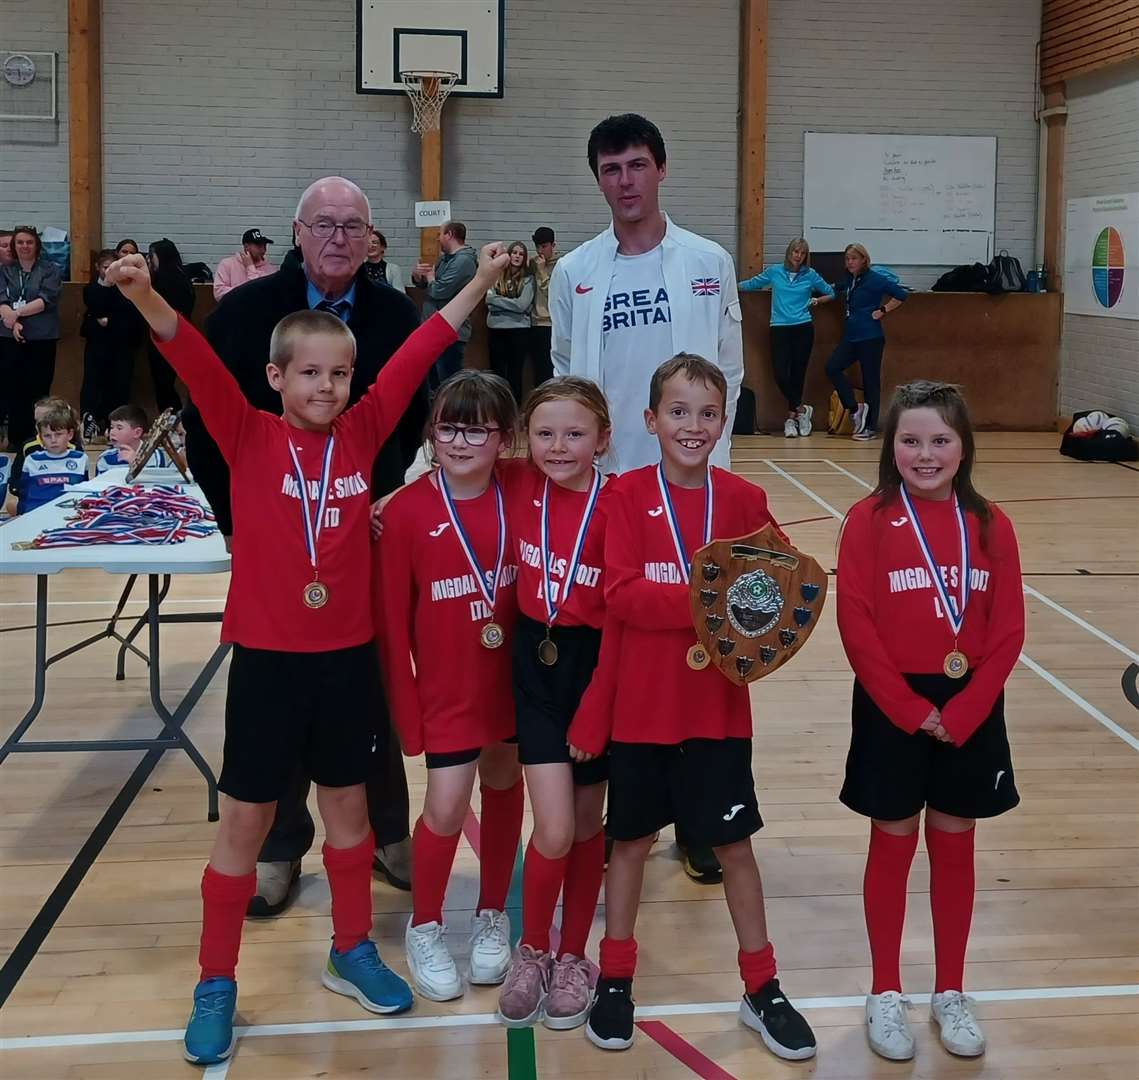 Winners of the trophy in the mixed class were a team from Lairg.